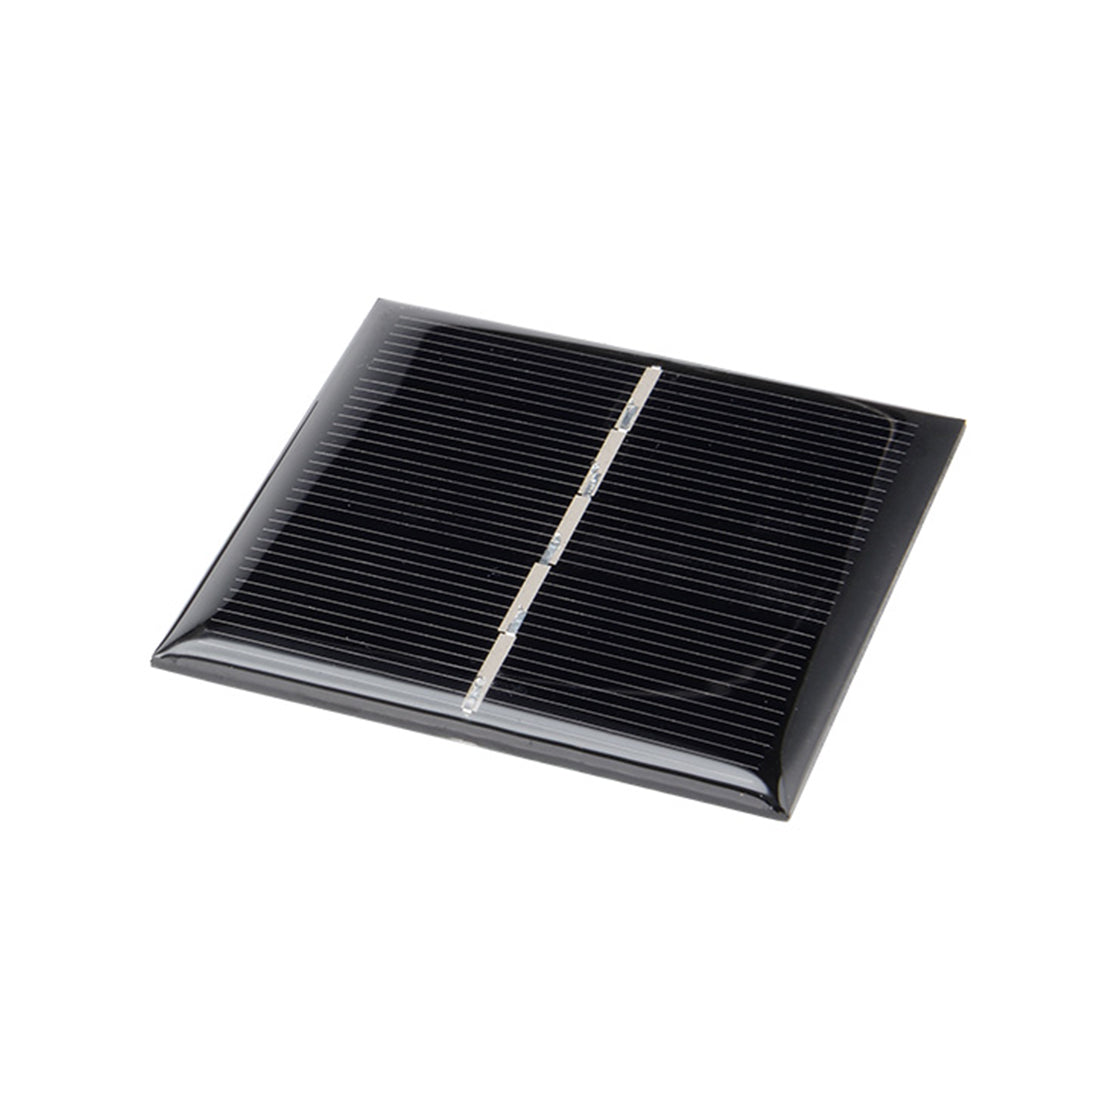 uxcell Uxcell 5Pcs 2.5V 120mA Poly Mini Solar Cell Panel Module DIY for Light Toys Charger 59.8mm x 59.8mm